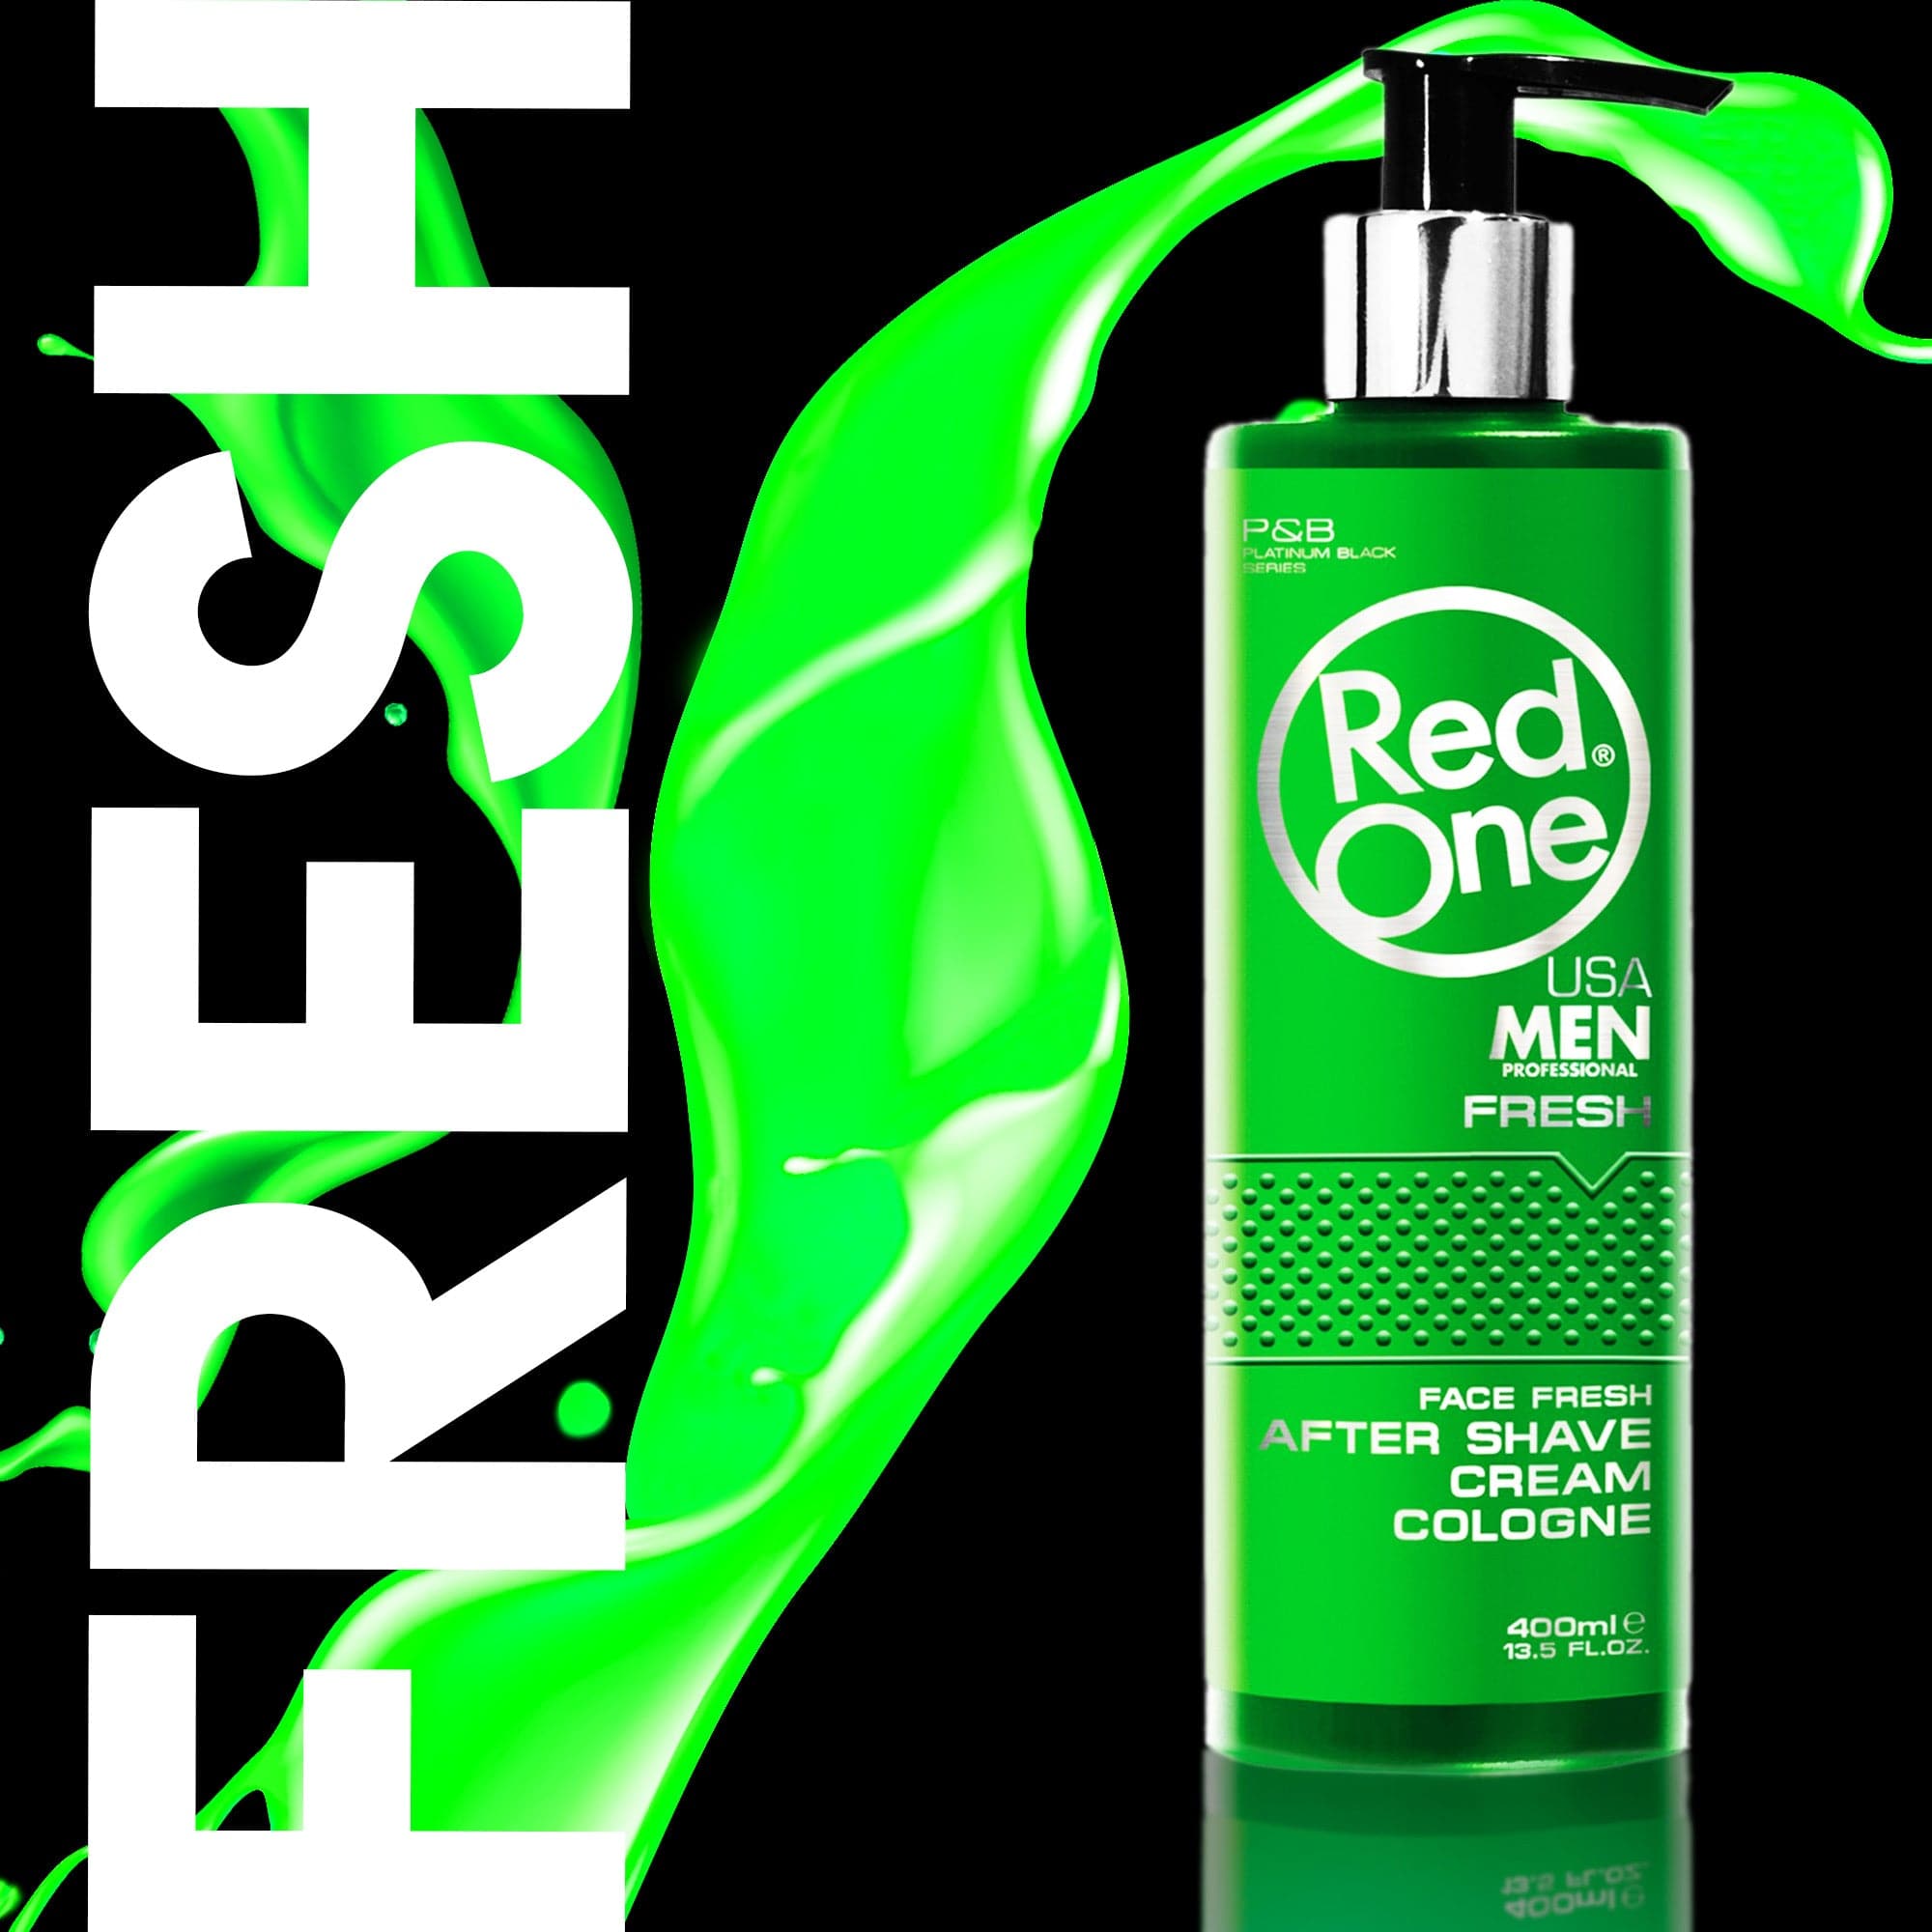 Redone - After Shave Cream Cologne Fresh 400ml